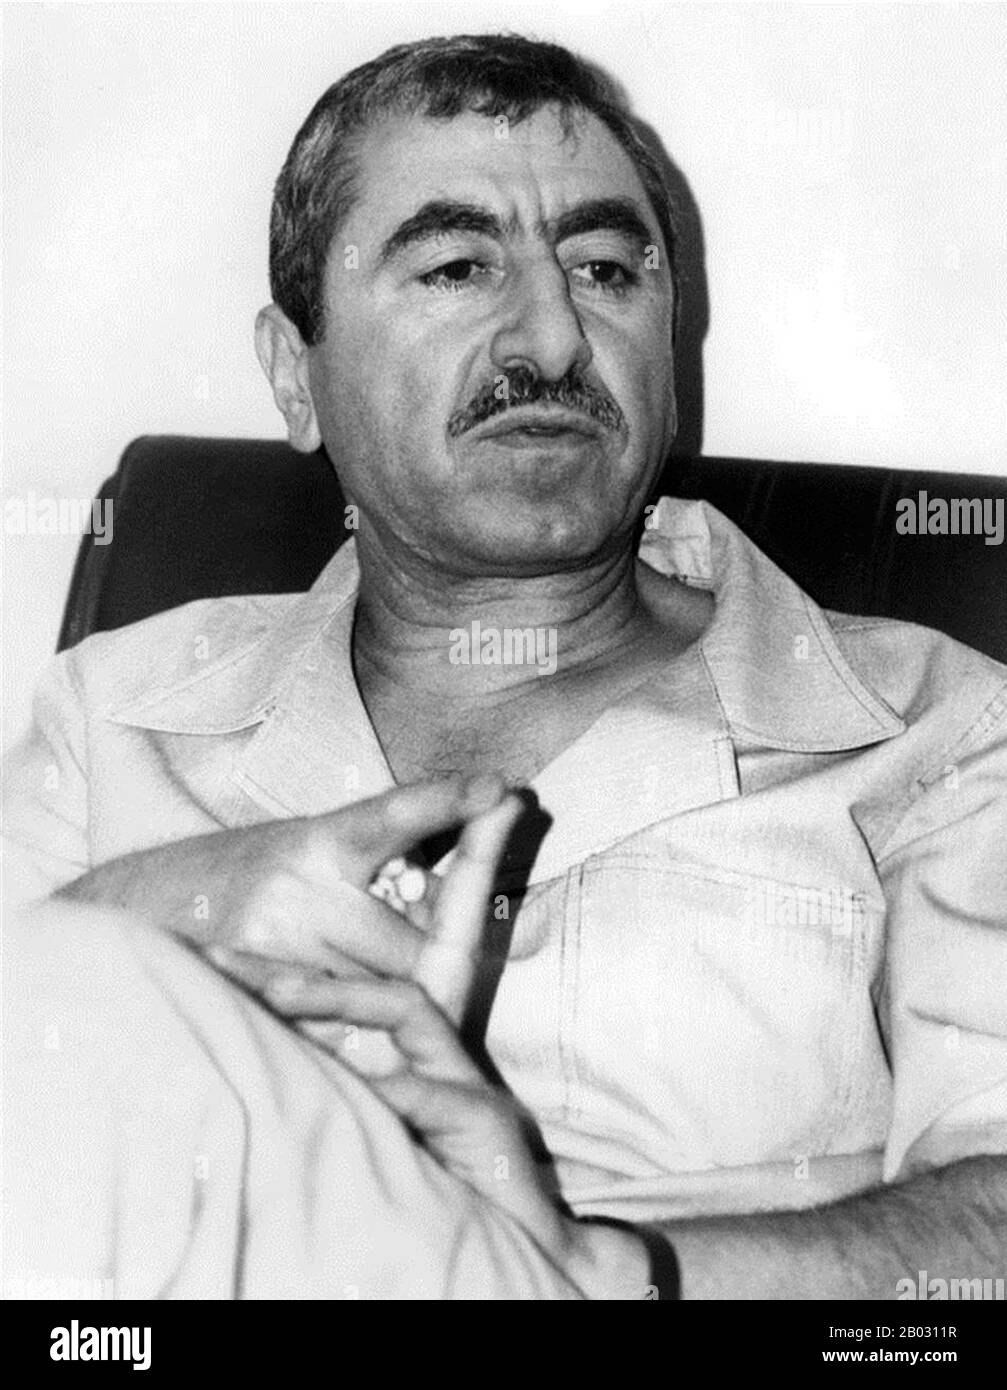 Hawatmeh hails from a Jordanian tribe and a Greek Catholic Christian background. He has been General Secretary of the Marxist Democratic Front for the Liberation of Palestine (DFLP) since its formation in a 1969 split from the Popular Front for the Liberation of Palestine (PFLP), of which he was also a founder. He was active as a left-wing leader in the Arab Nationalist Movement (ANM), which preceded the PFLP.  Hawatmeh opposed the 1993 Oslo Accords, but became more conciliatory in the late 1990s. In 1999 he agreed to meet with Yassir Arafat and even shook hands with the Israeli President, Eze Stock Photo